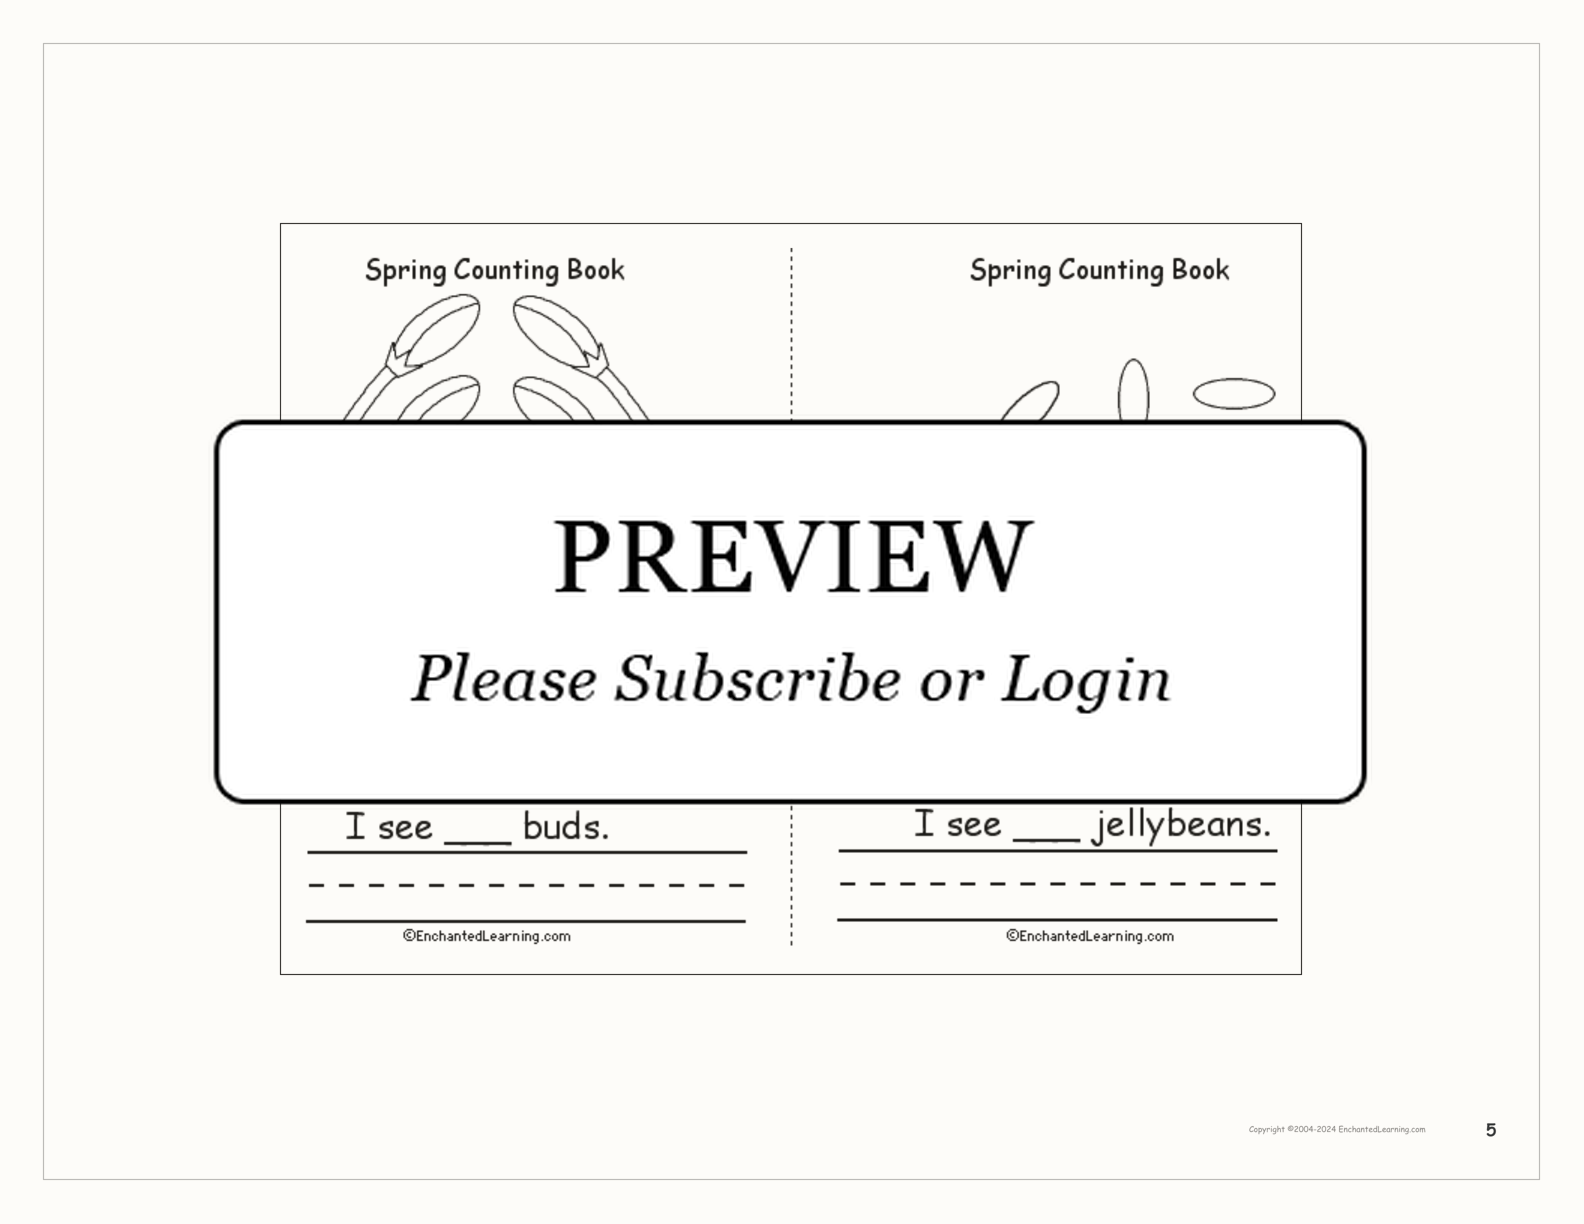 Spring Counting Book interactive worksheet page 5